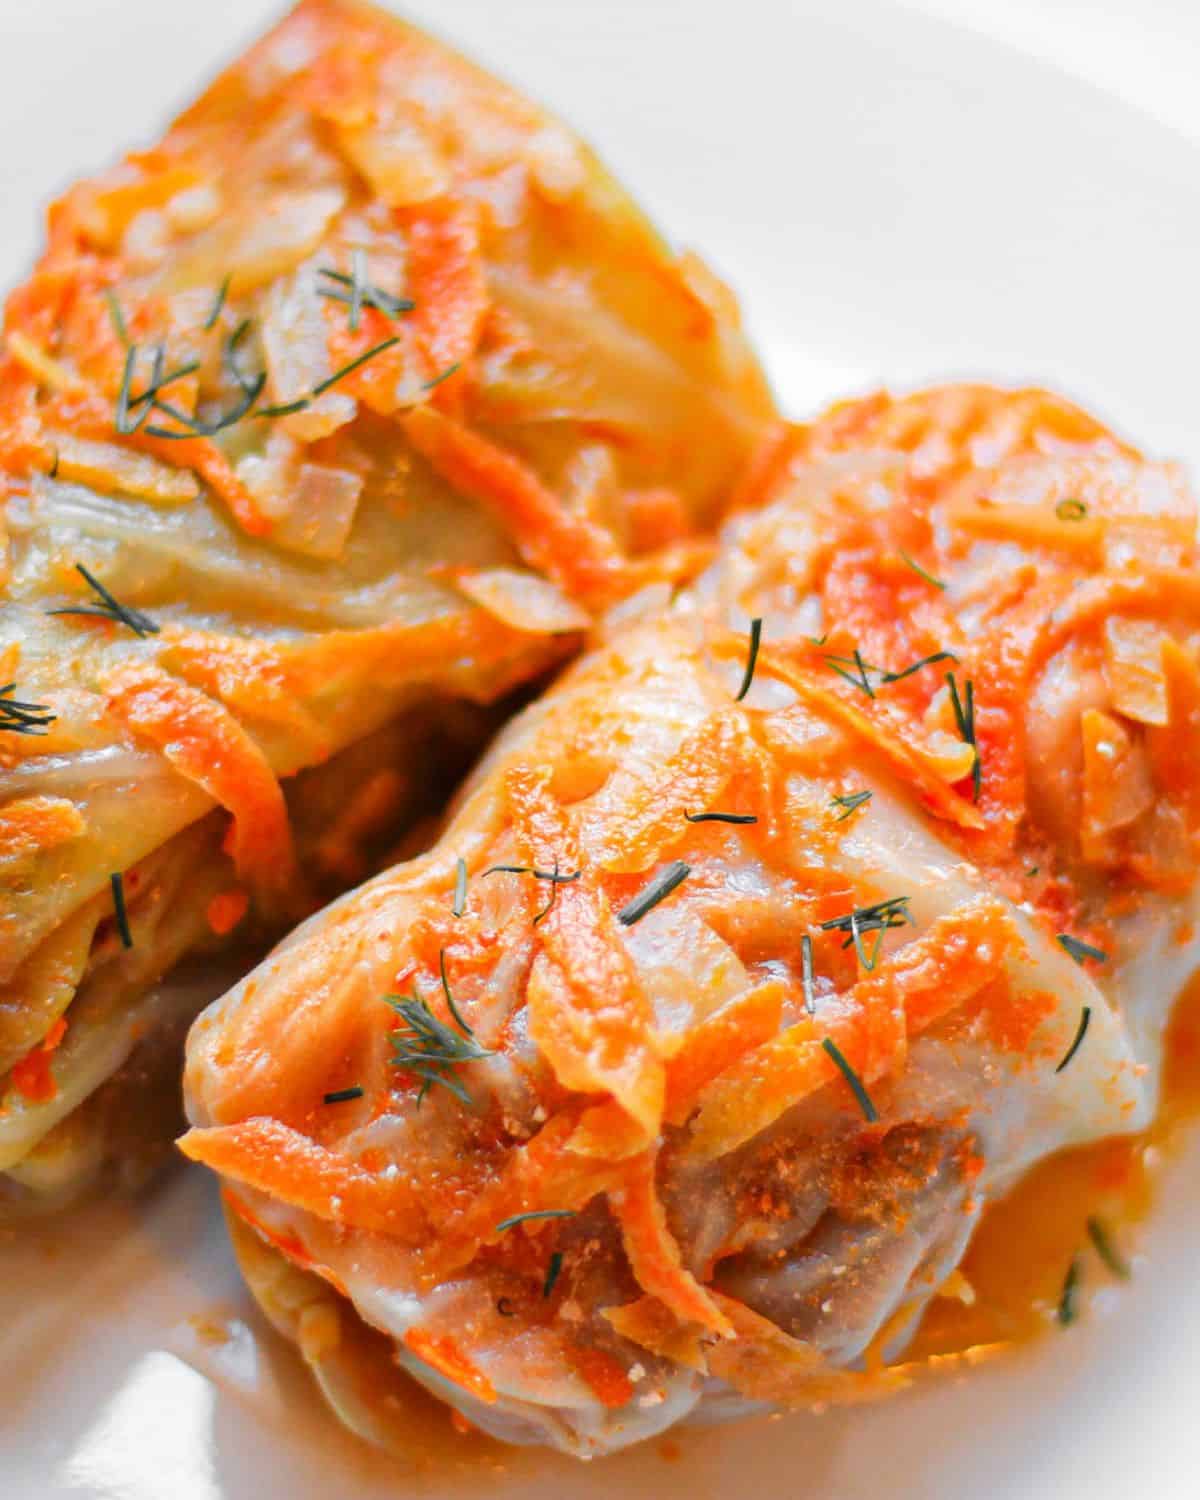 Two cabbage rolls on a white plate are placed next to each other. Green chopped dill is sprinkled on top of the rolls.